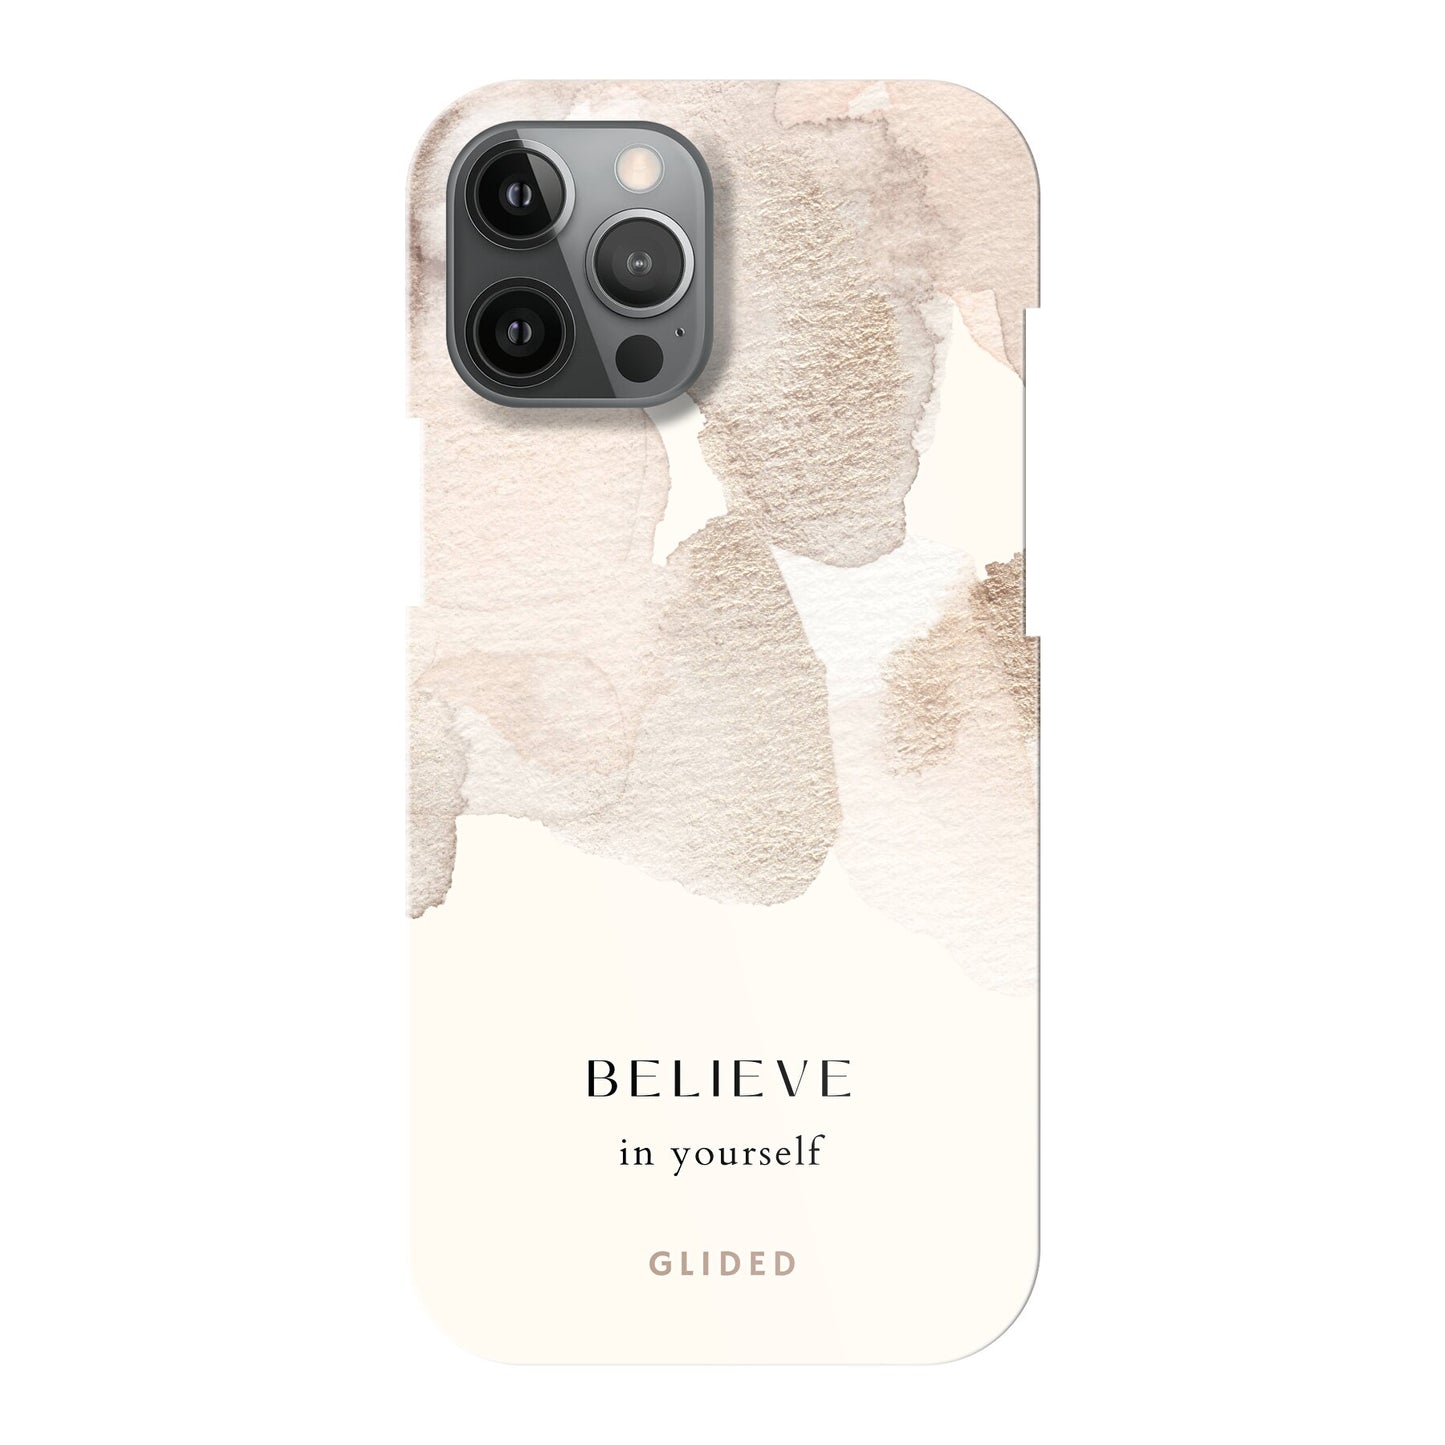 Believe in yourself - iPhone 12 Pro Max Handyhülle Hard Case